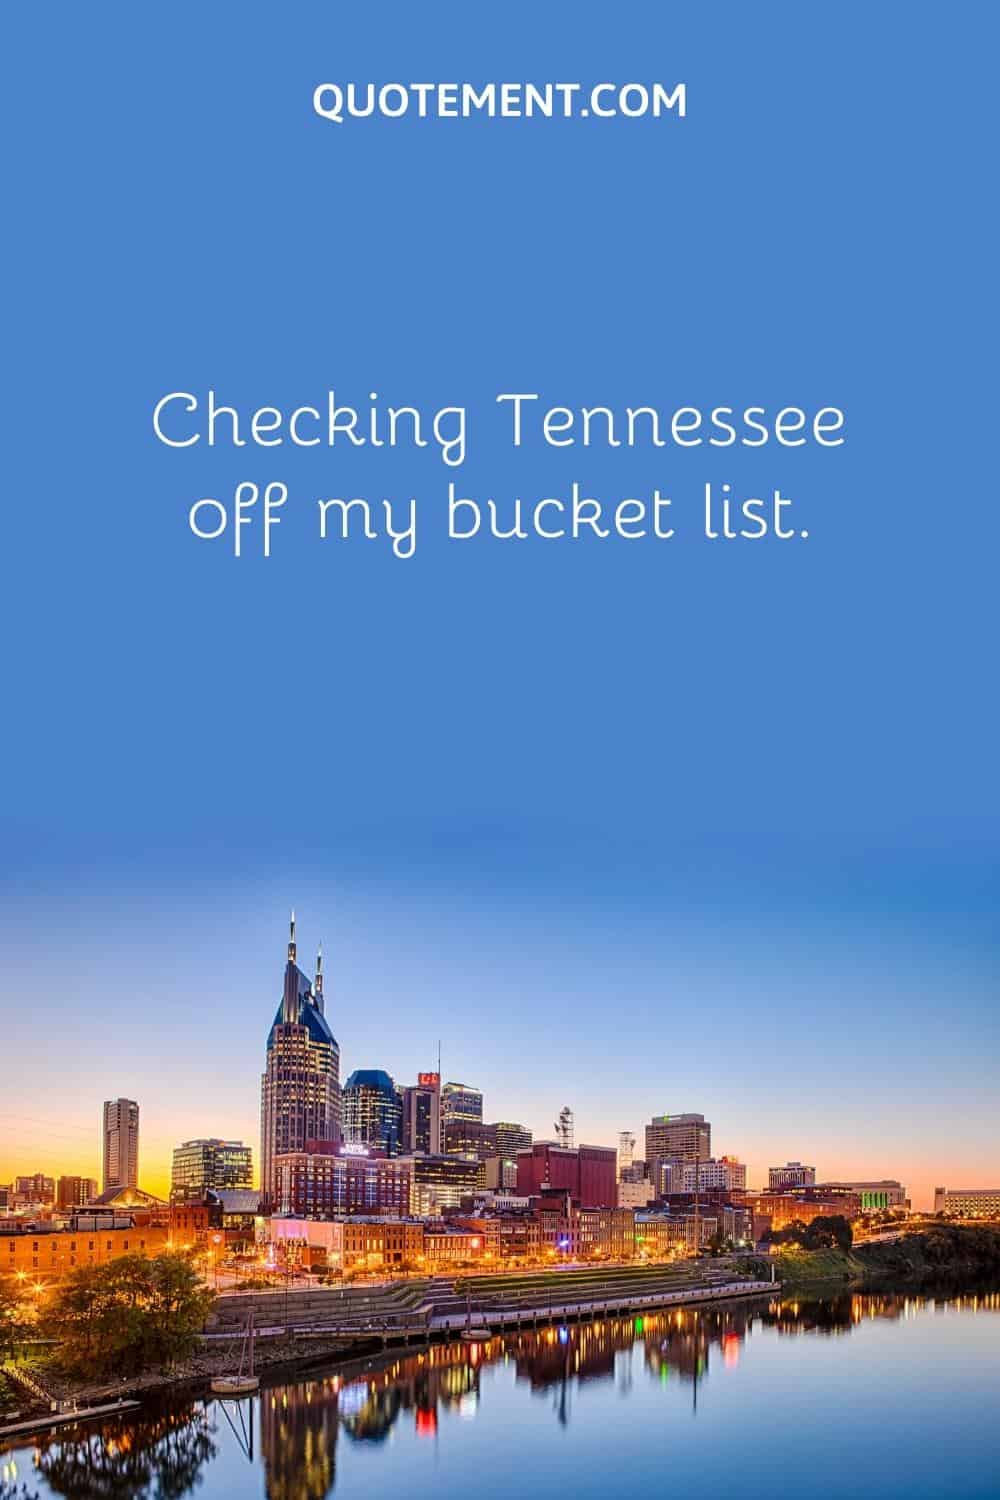 Checking Tennessee off my bucket list.